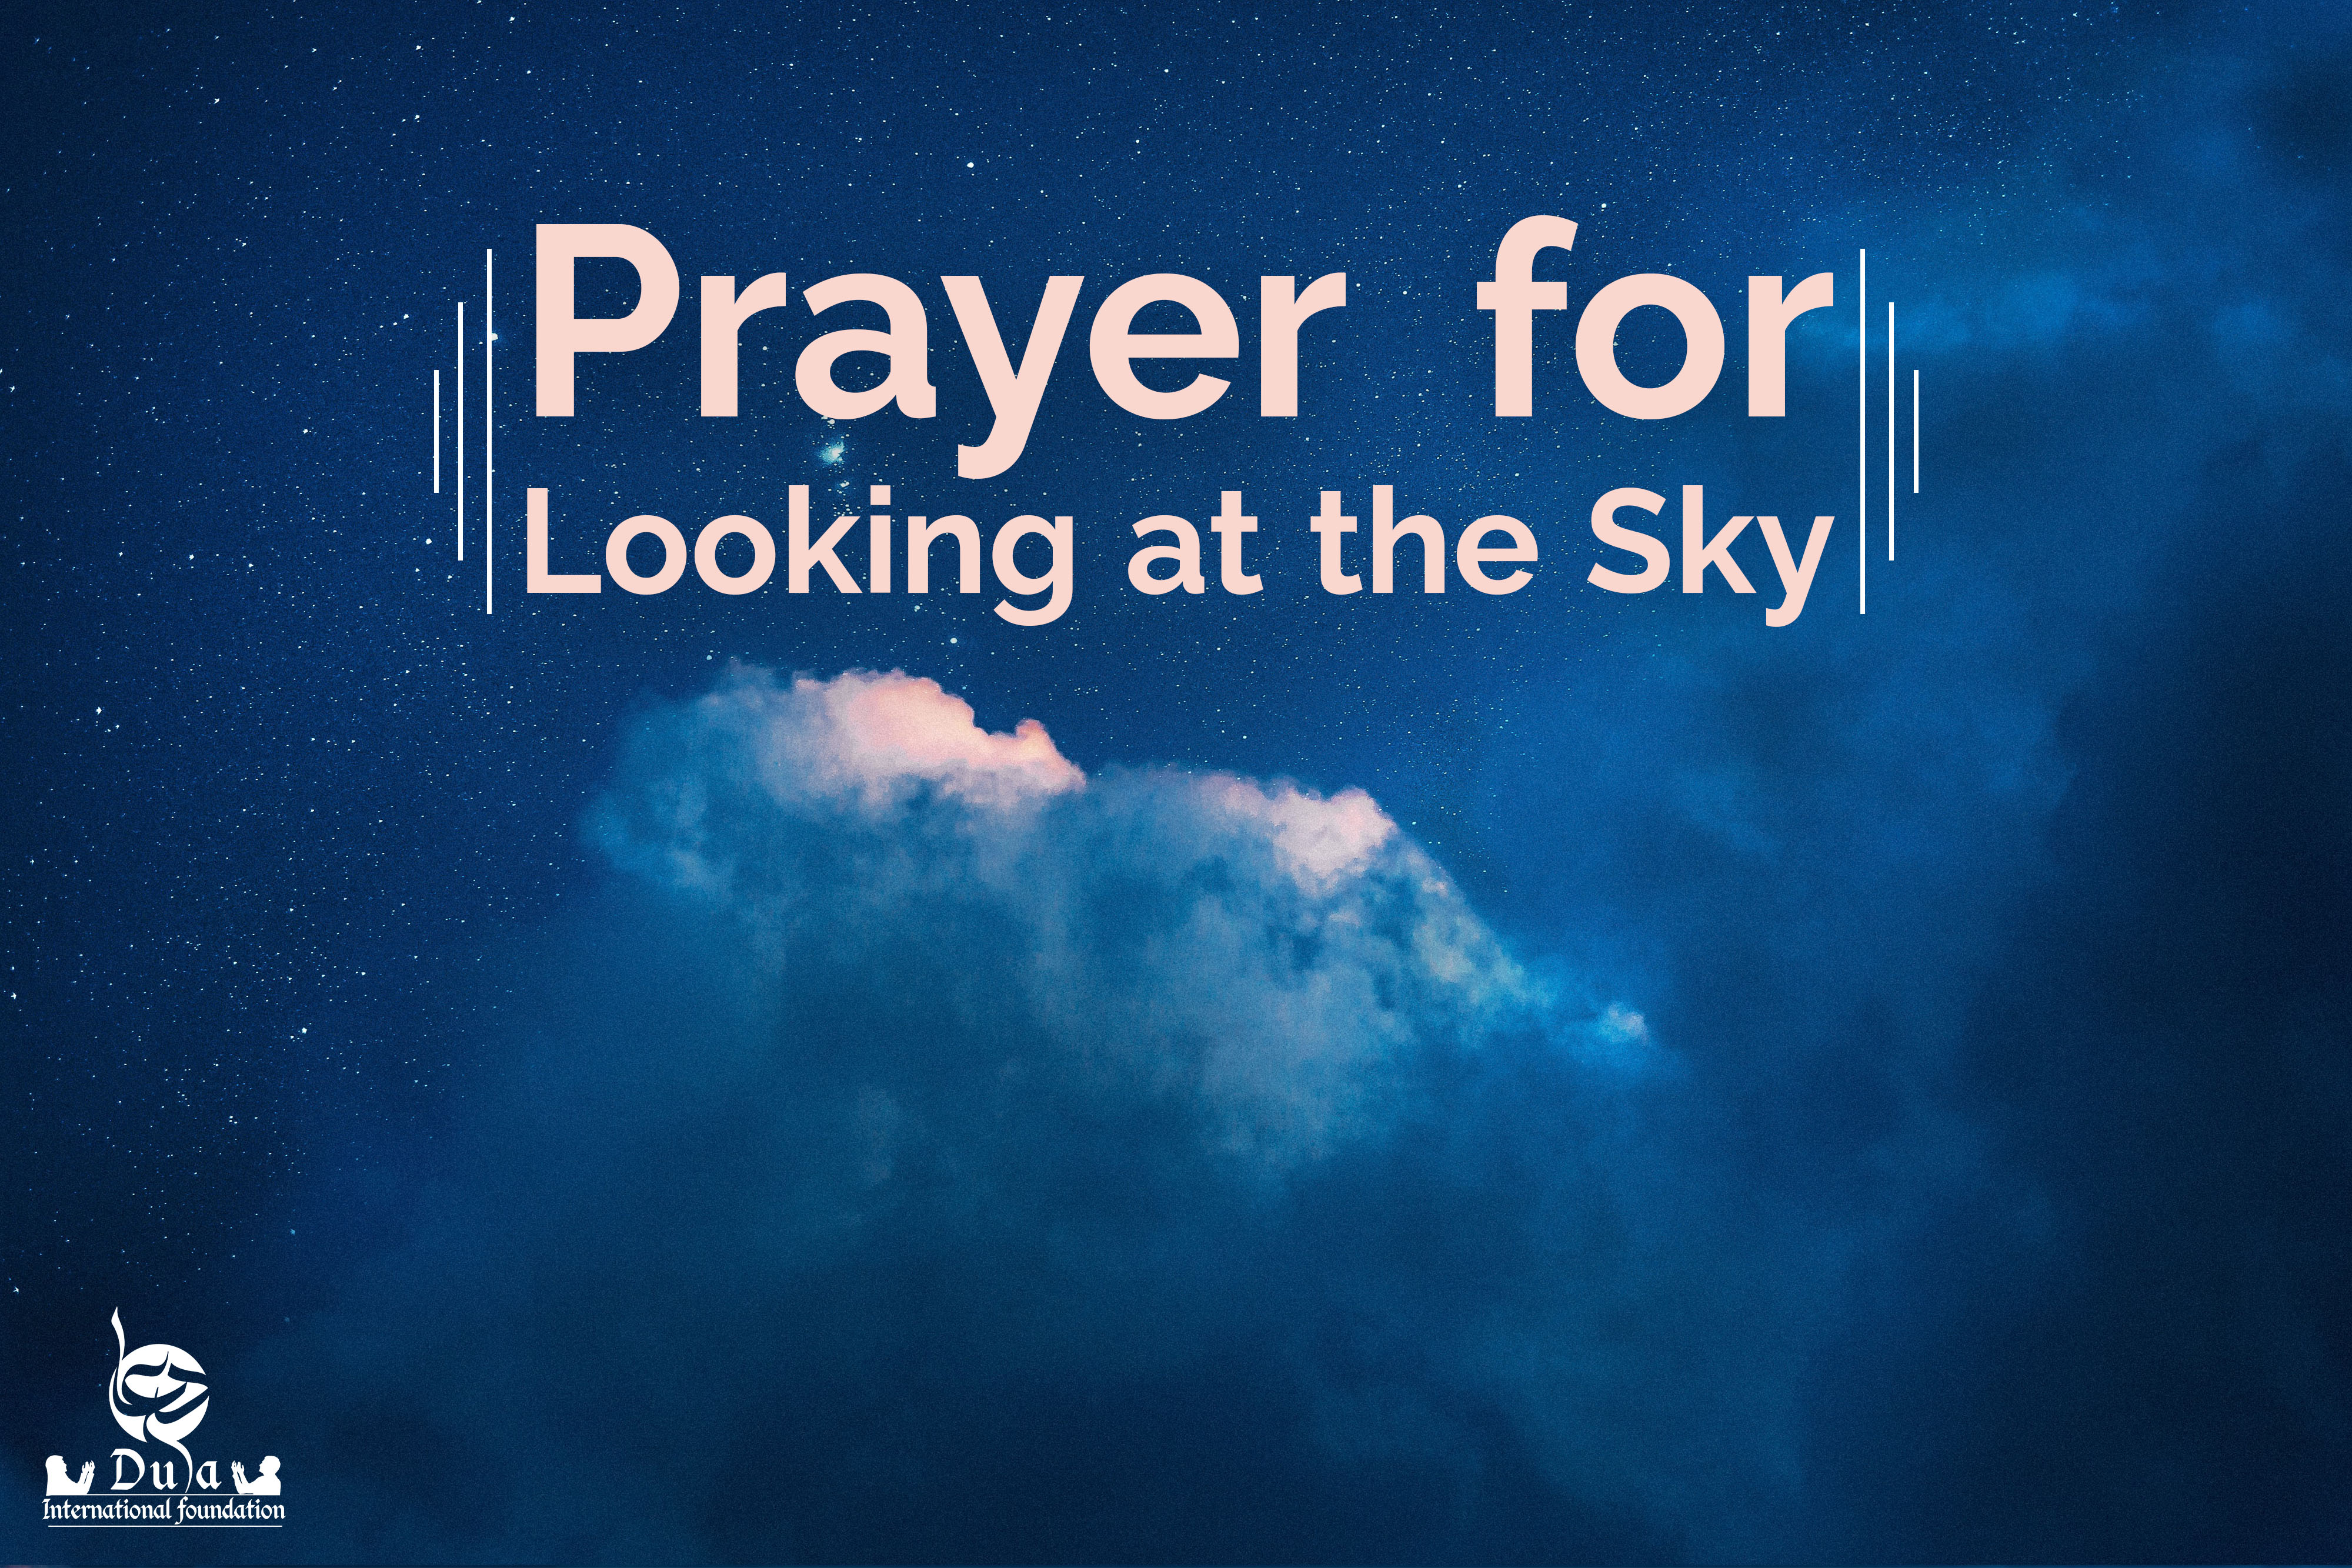 Prayer for Looking at the Sky